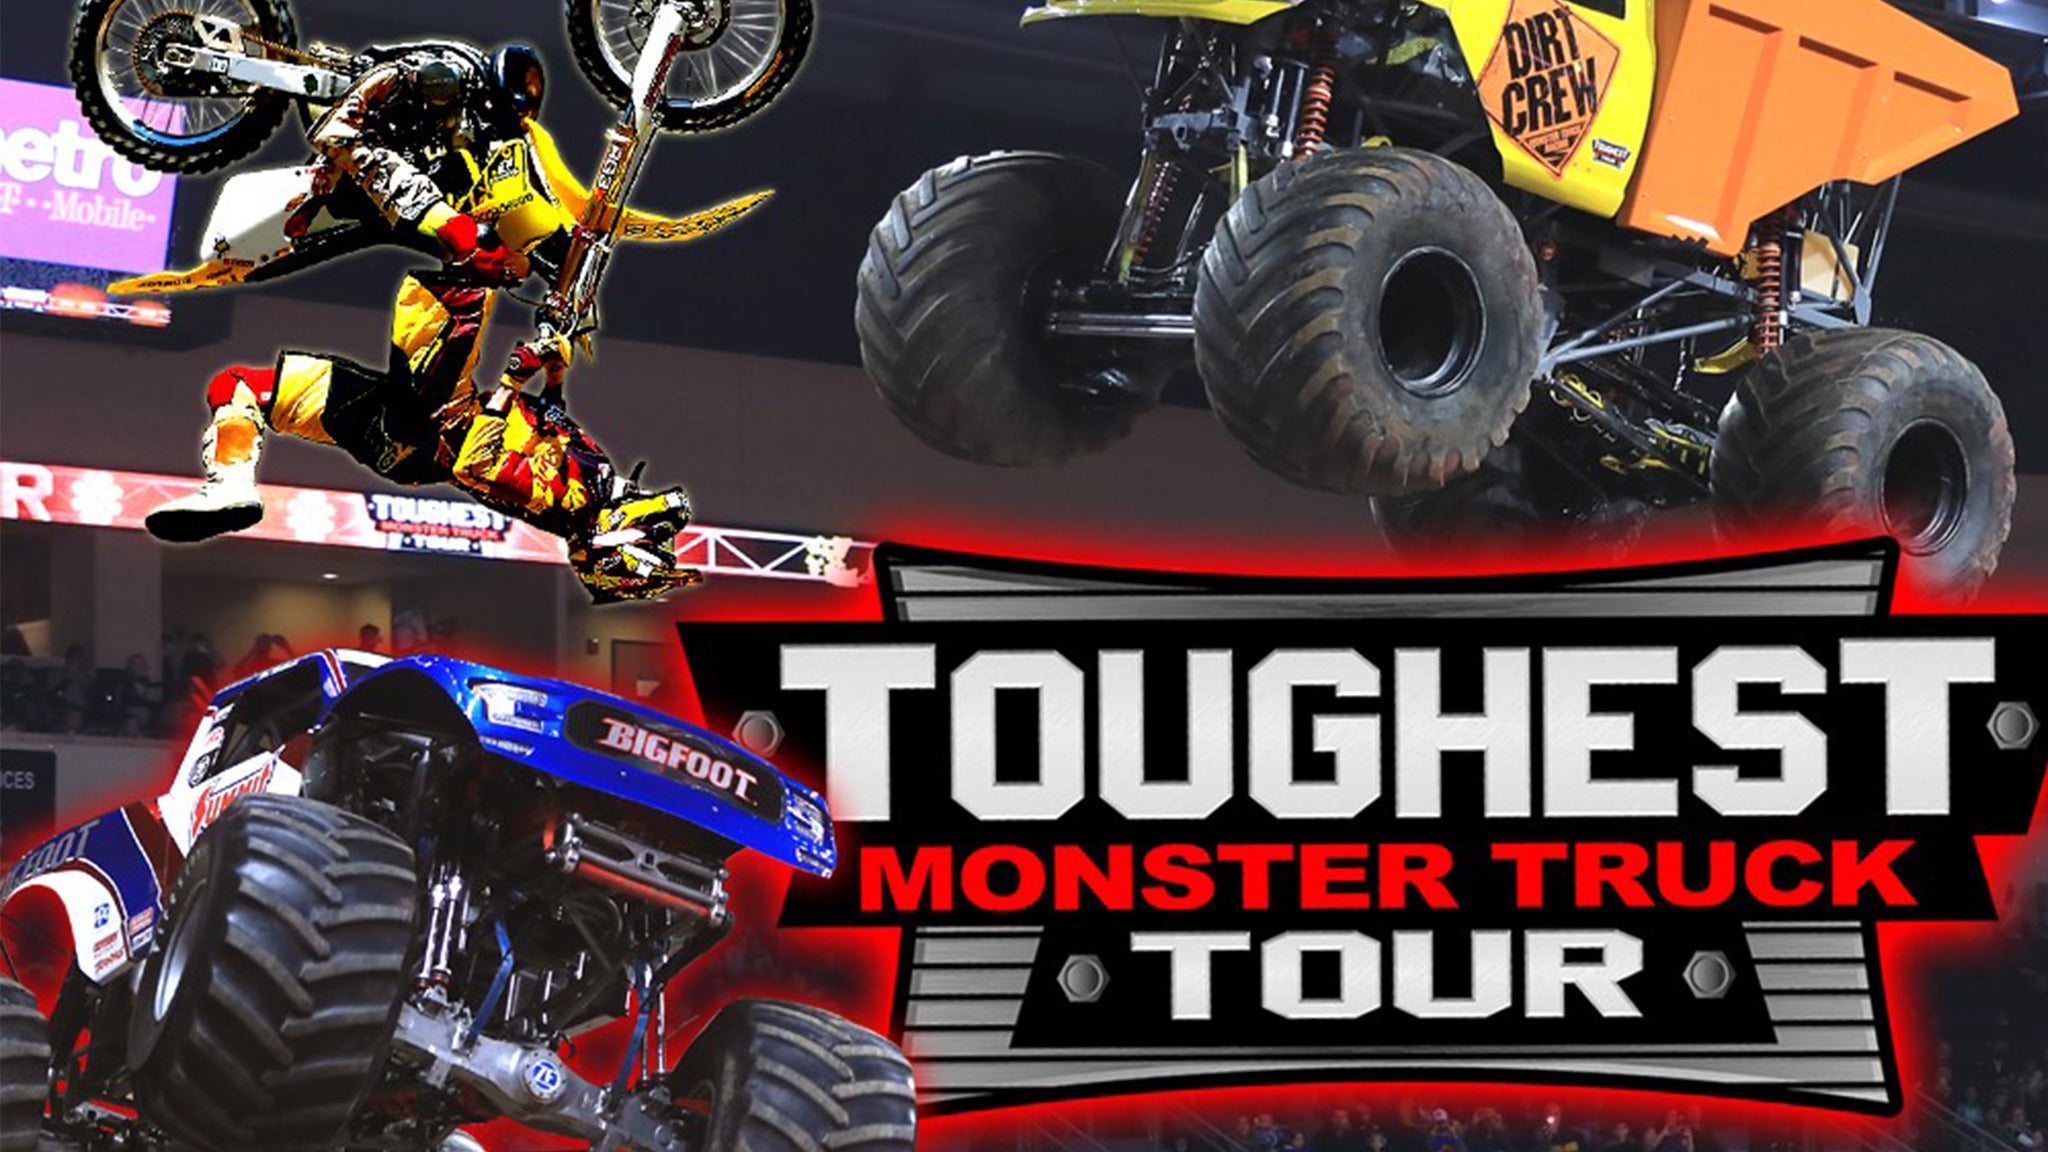 Toughest Monster Truck Tour pre-sale password for advance tickets in Sioux Falls